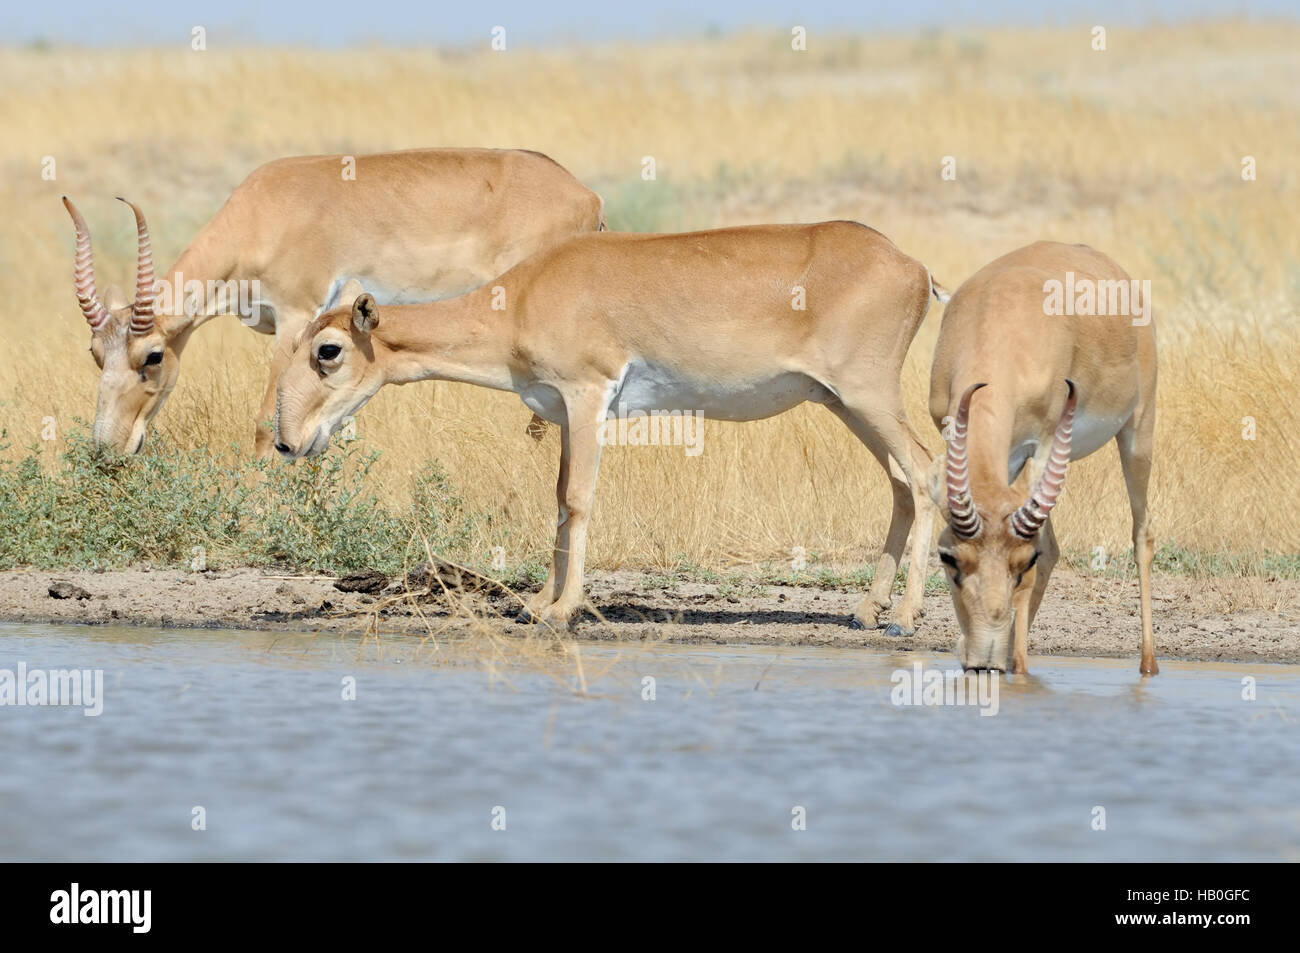 Wild Saiga antelopes (Saiga tatarica) at the watering place in the steppe. Federal nature reserve Mekletinskii, Kalmykia, Russia, August, 2015 Stock Photo